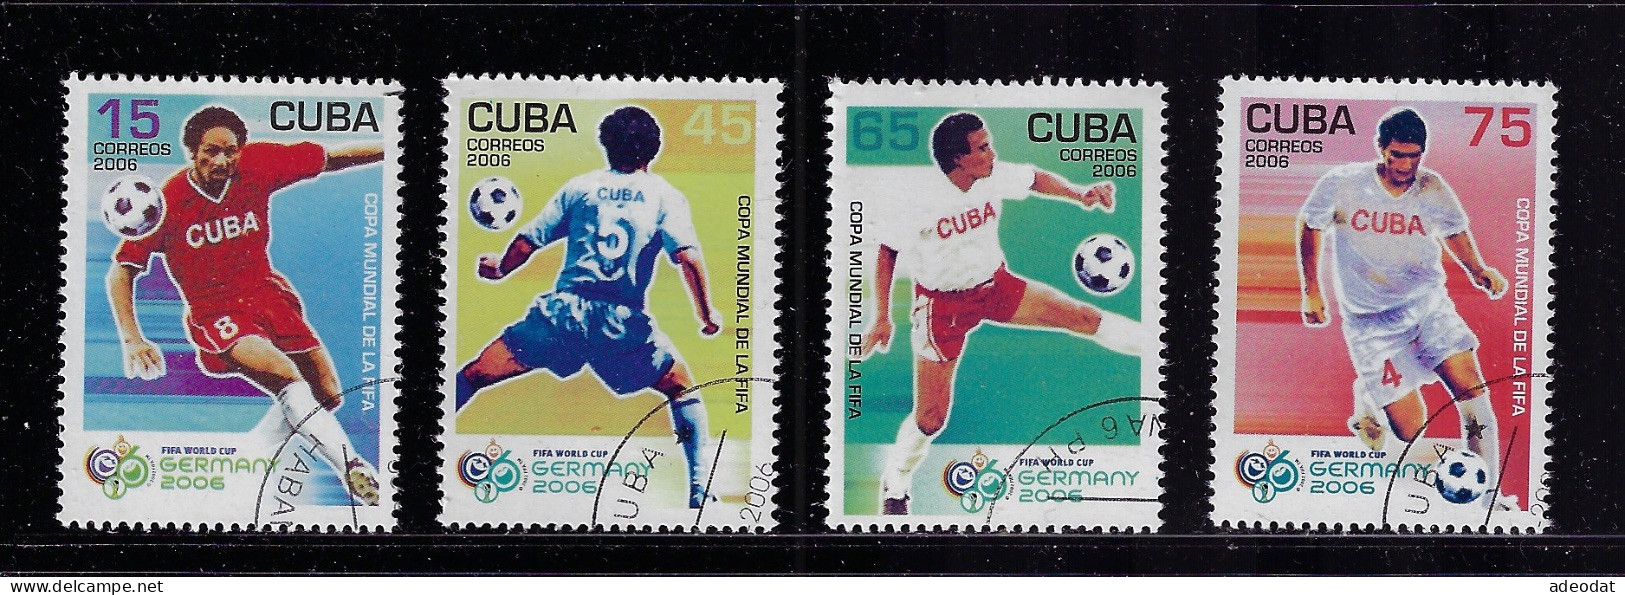 CUBA 2006 SCOTT 4596A-D CANCELLED - Used Stamps